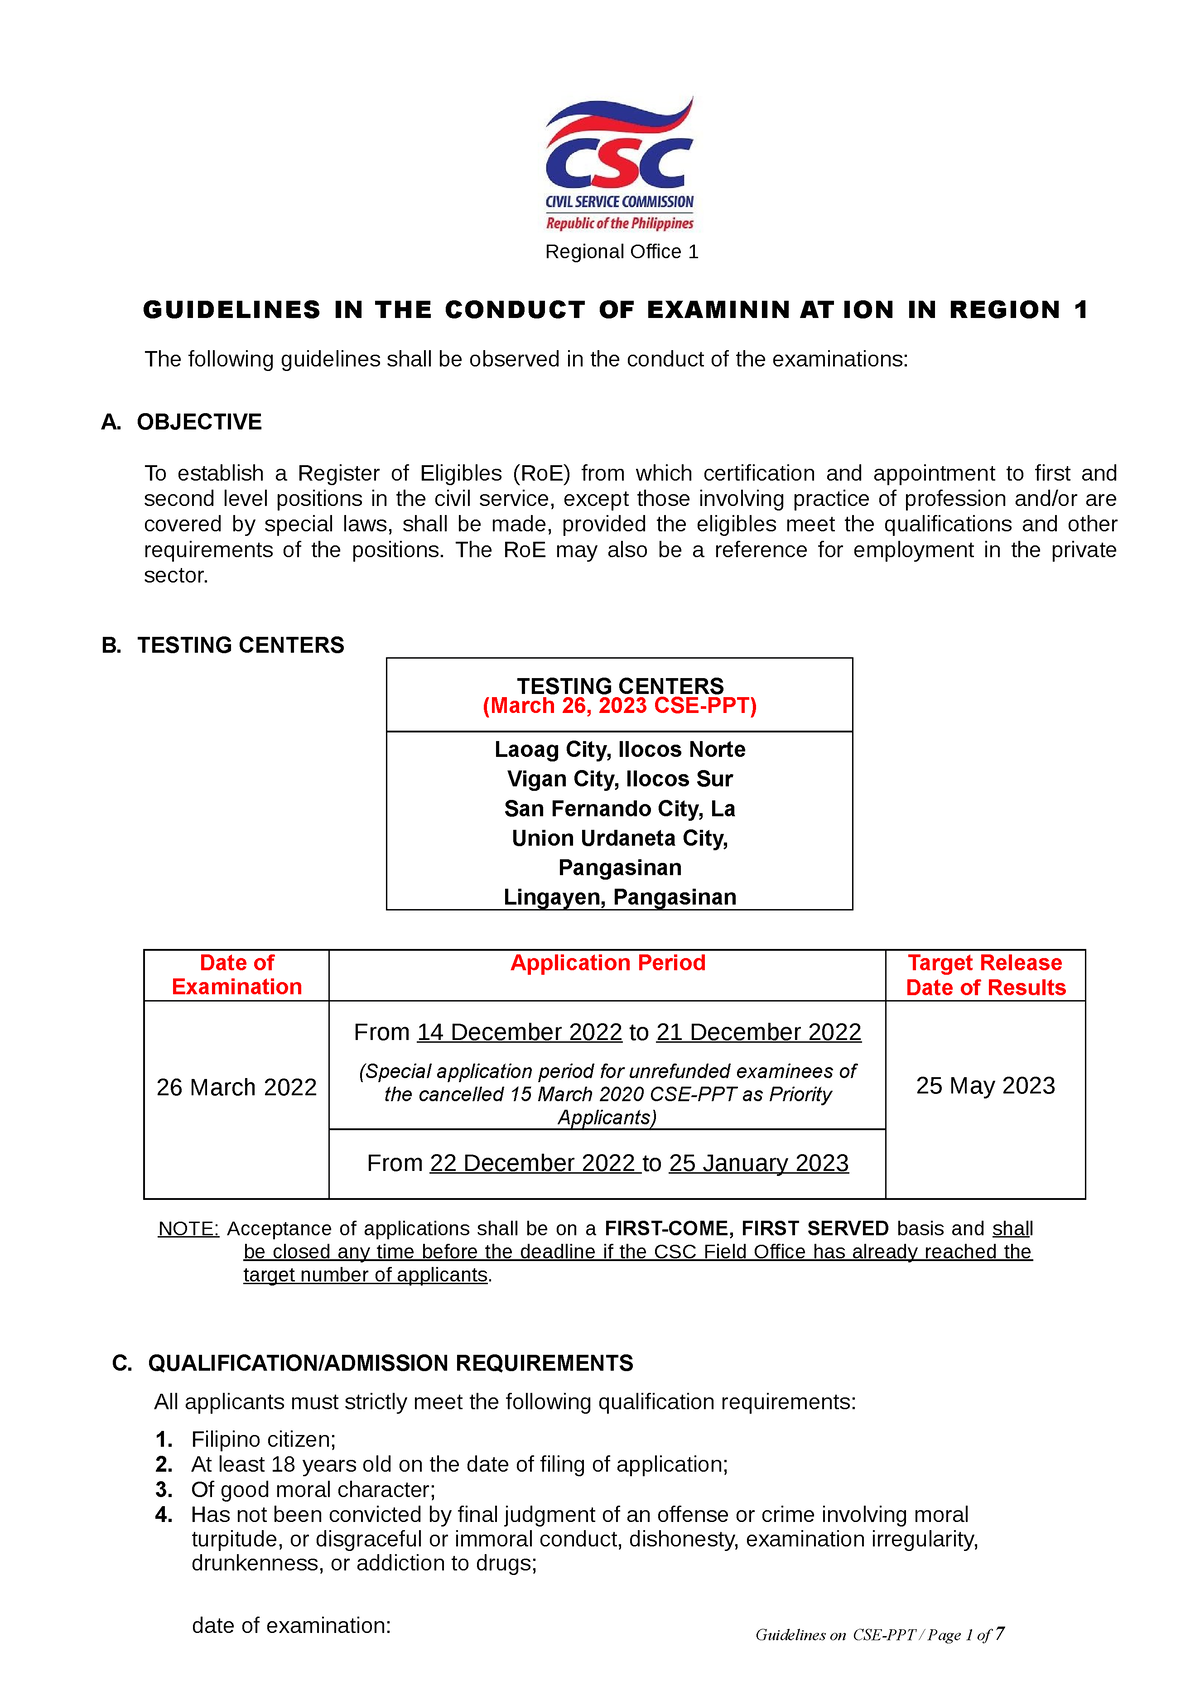 notice of room assignment csc march 26 2023